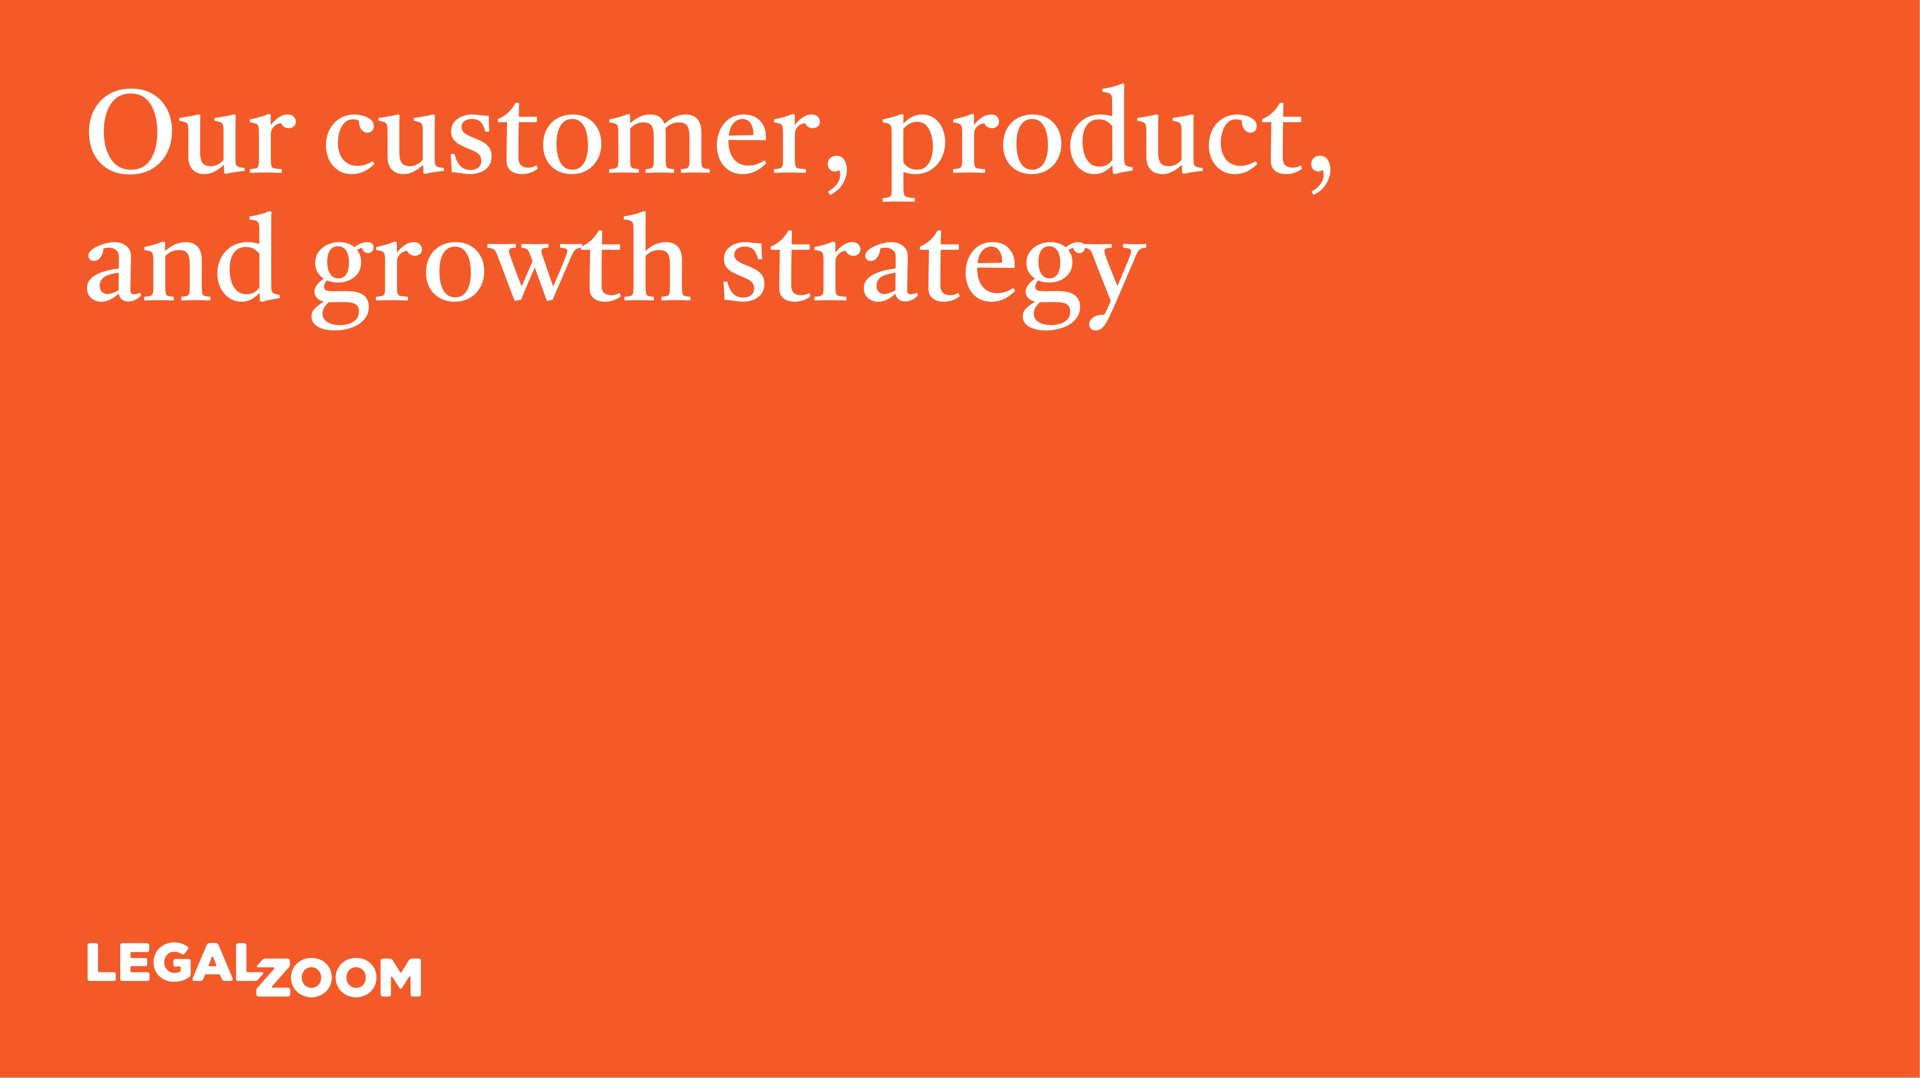 our customer product and growth strategy | LegalZoom.com